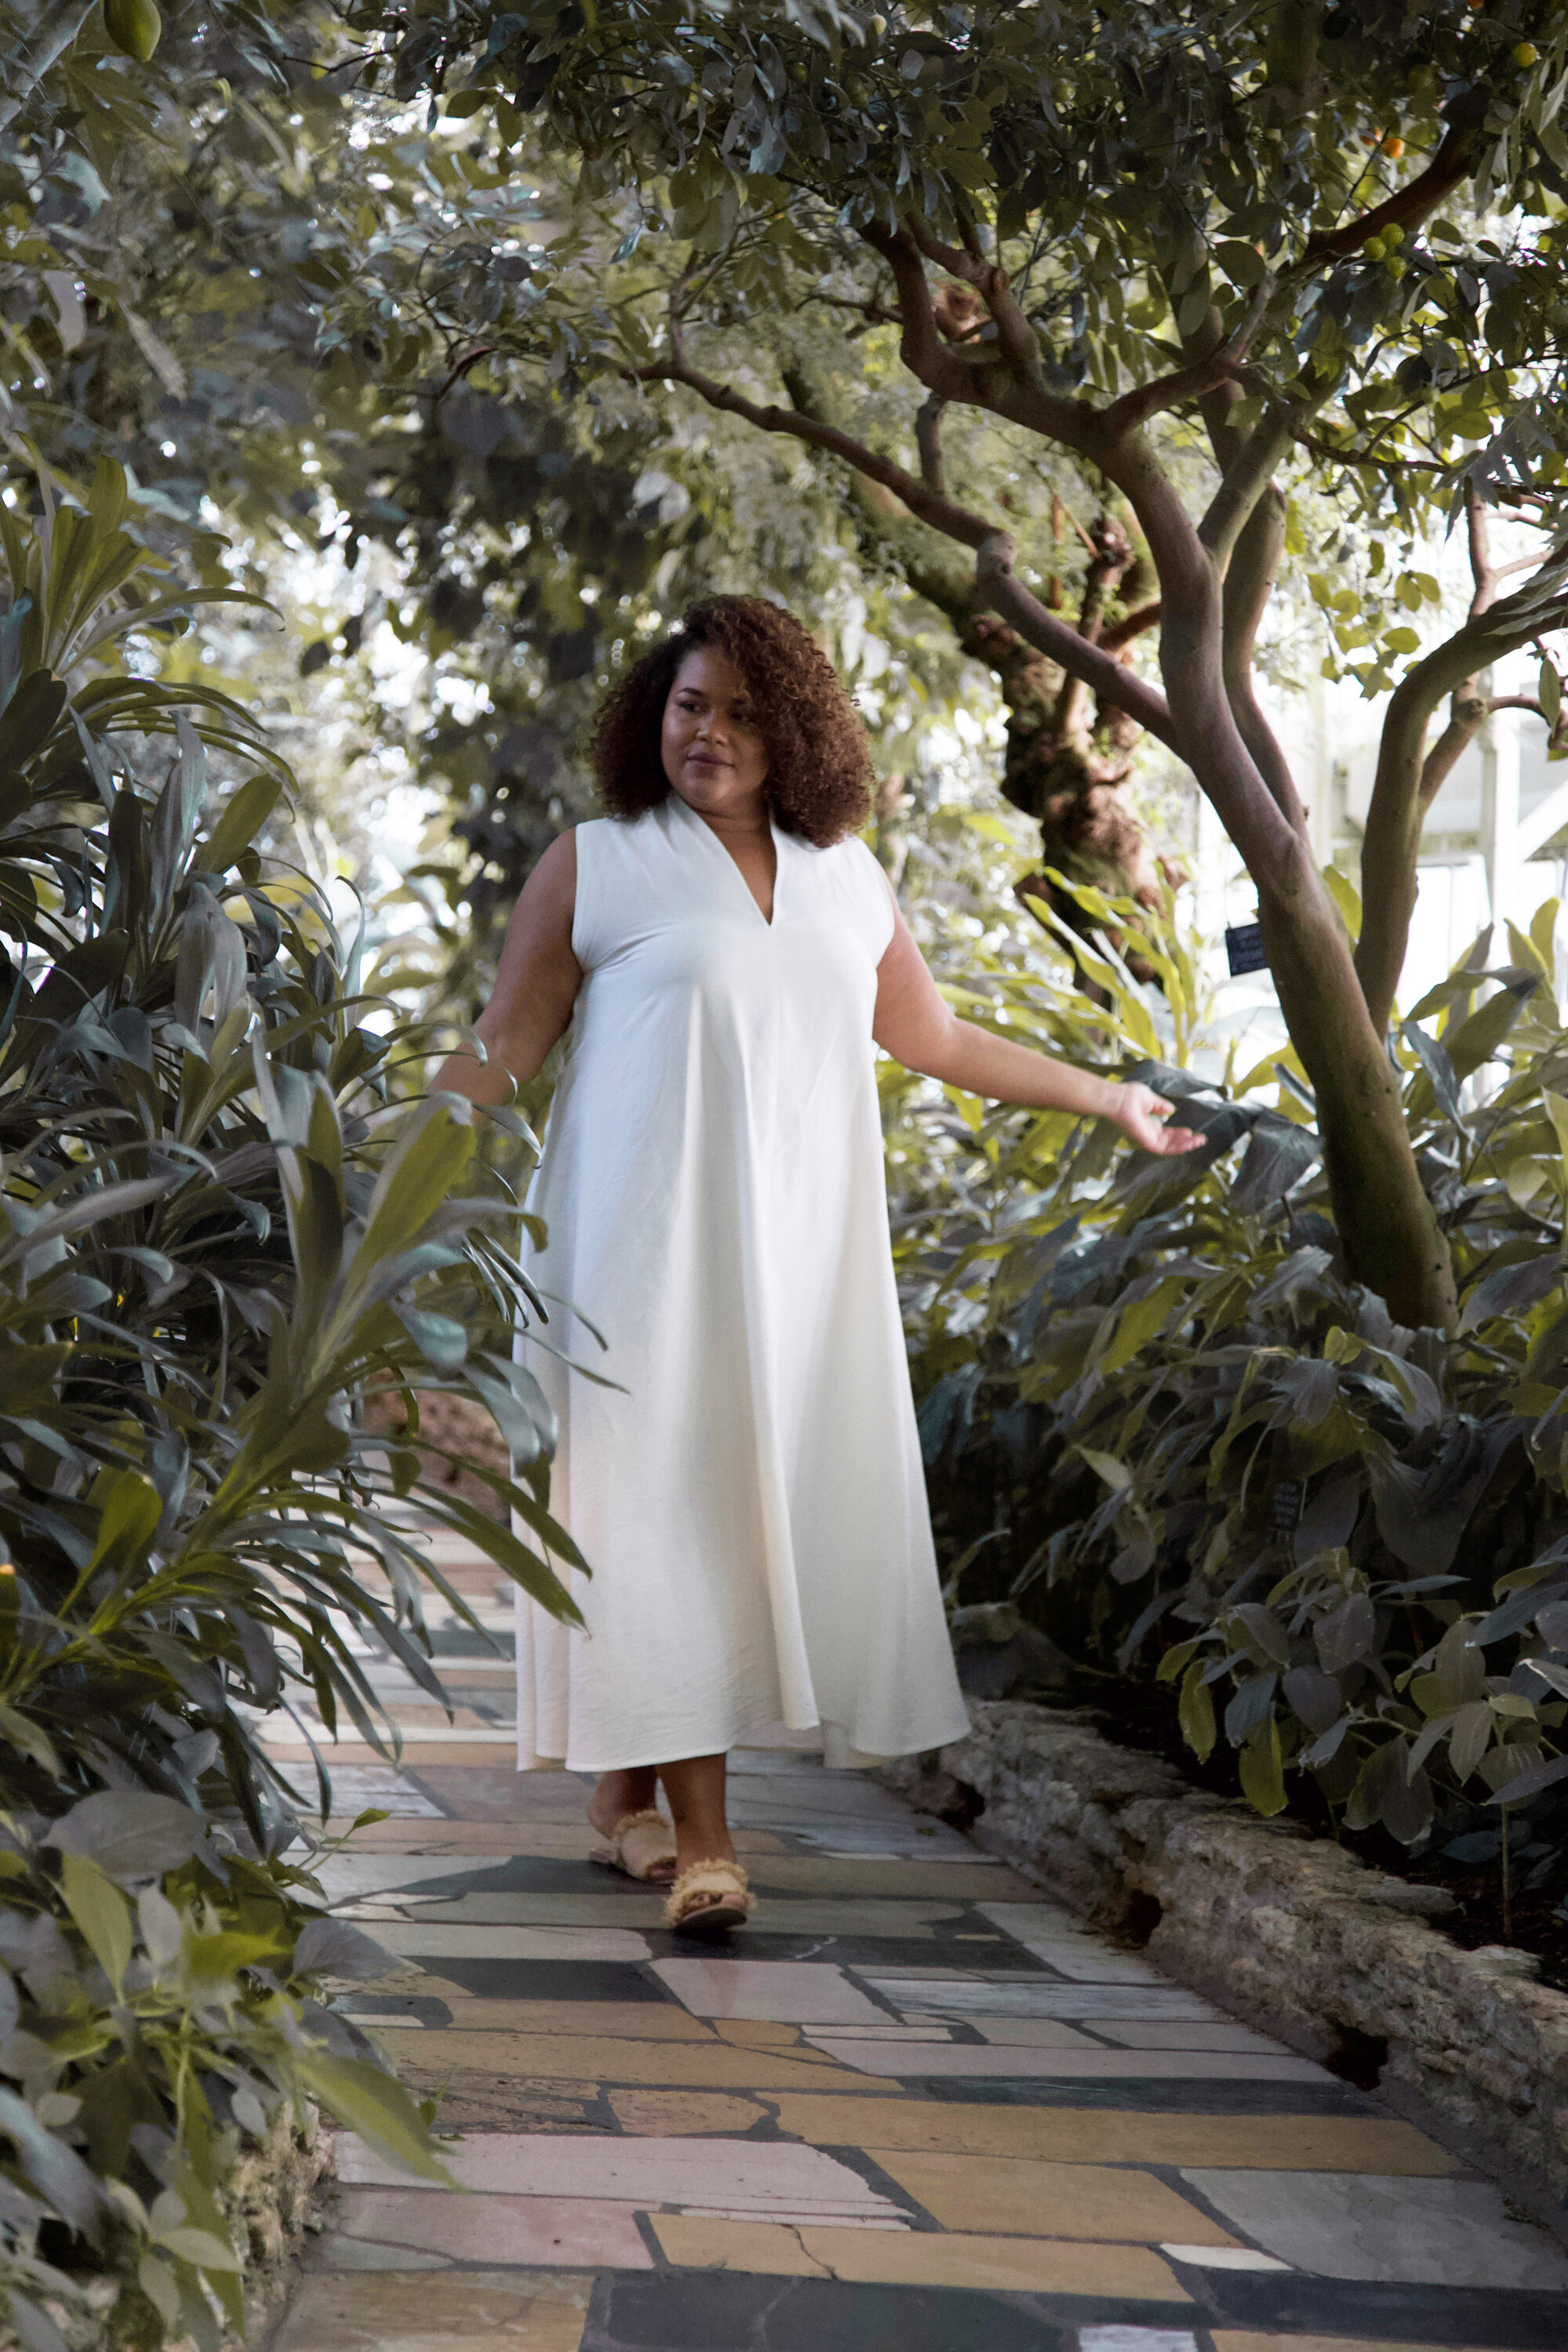 extended sizing in ethical fashion | reading my tea leaves